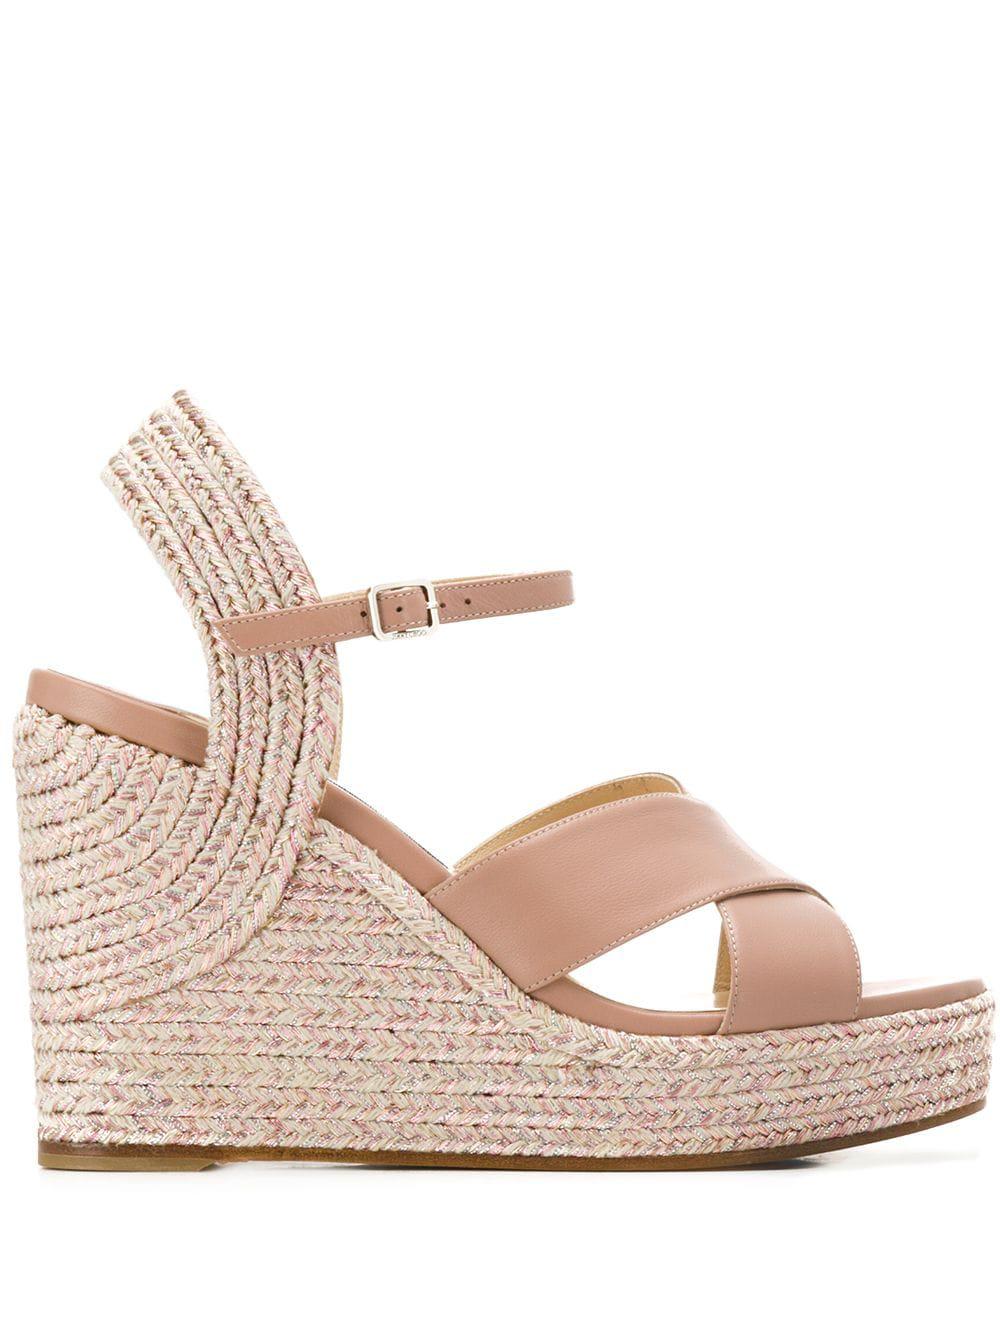 Dellena 100mm wedge sandals by JIMMY CHOO